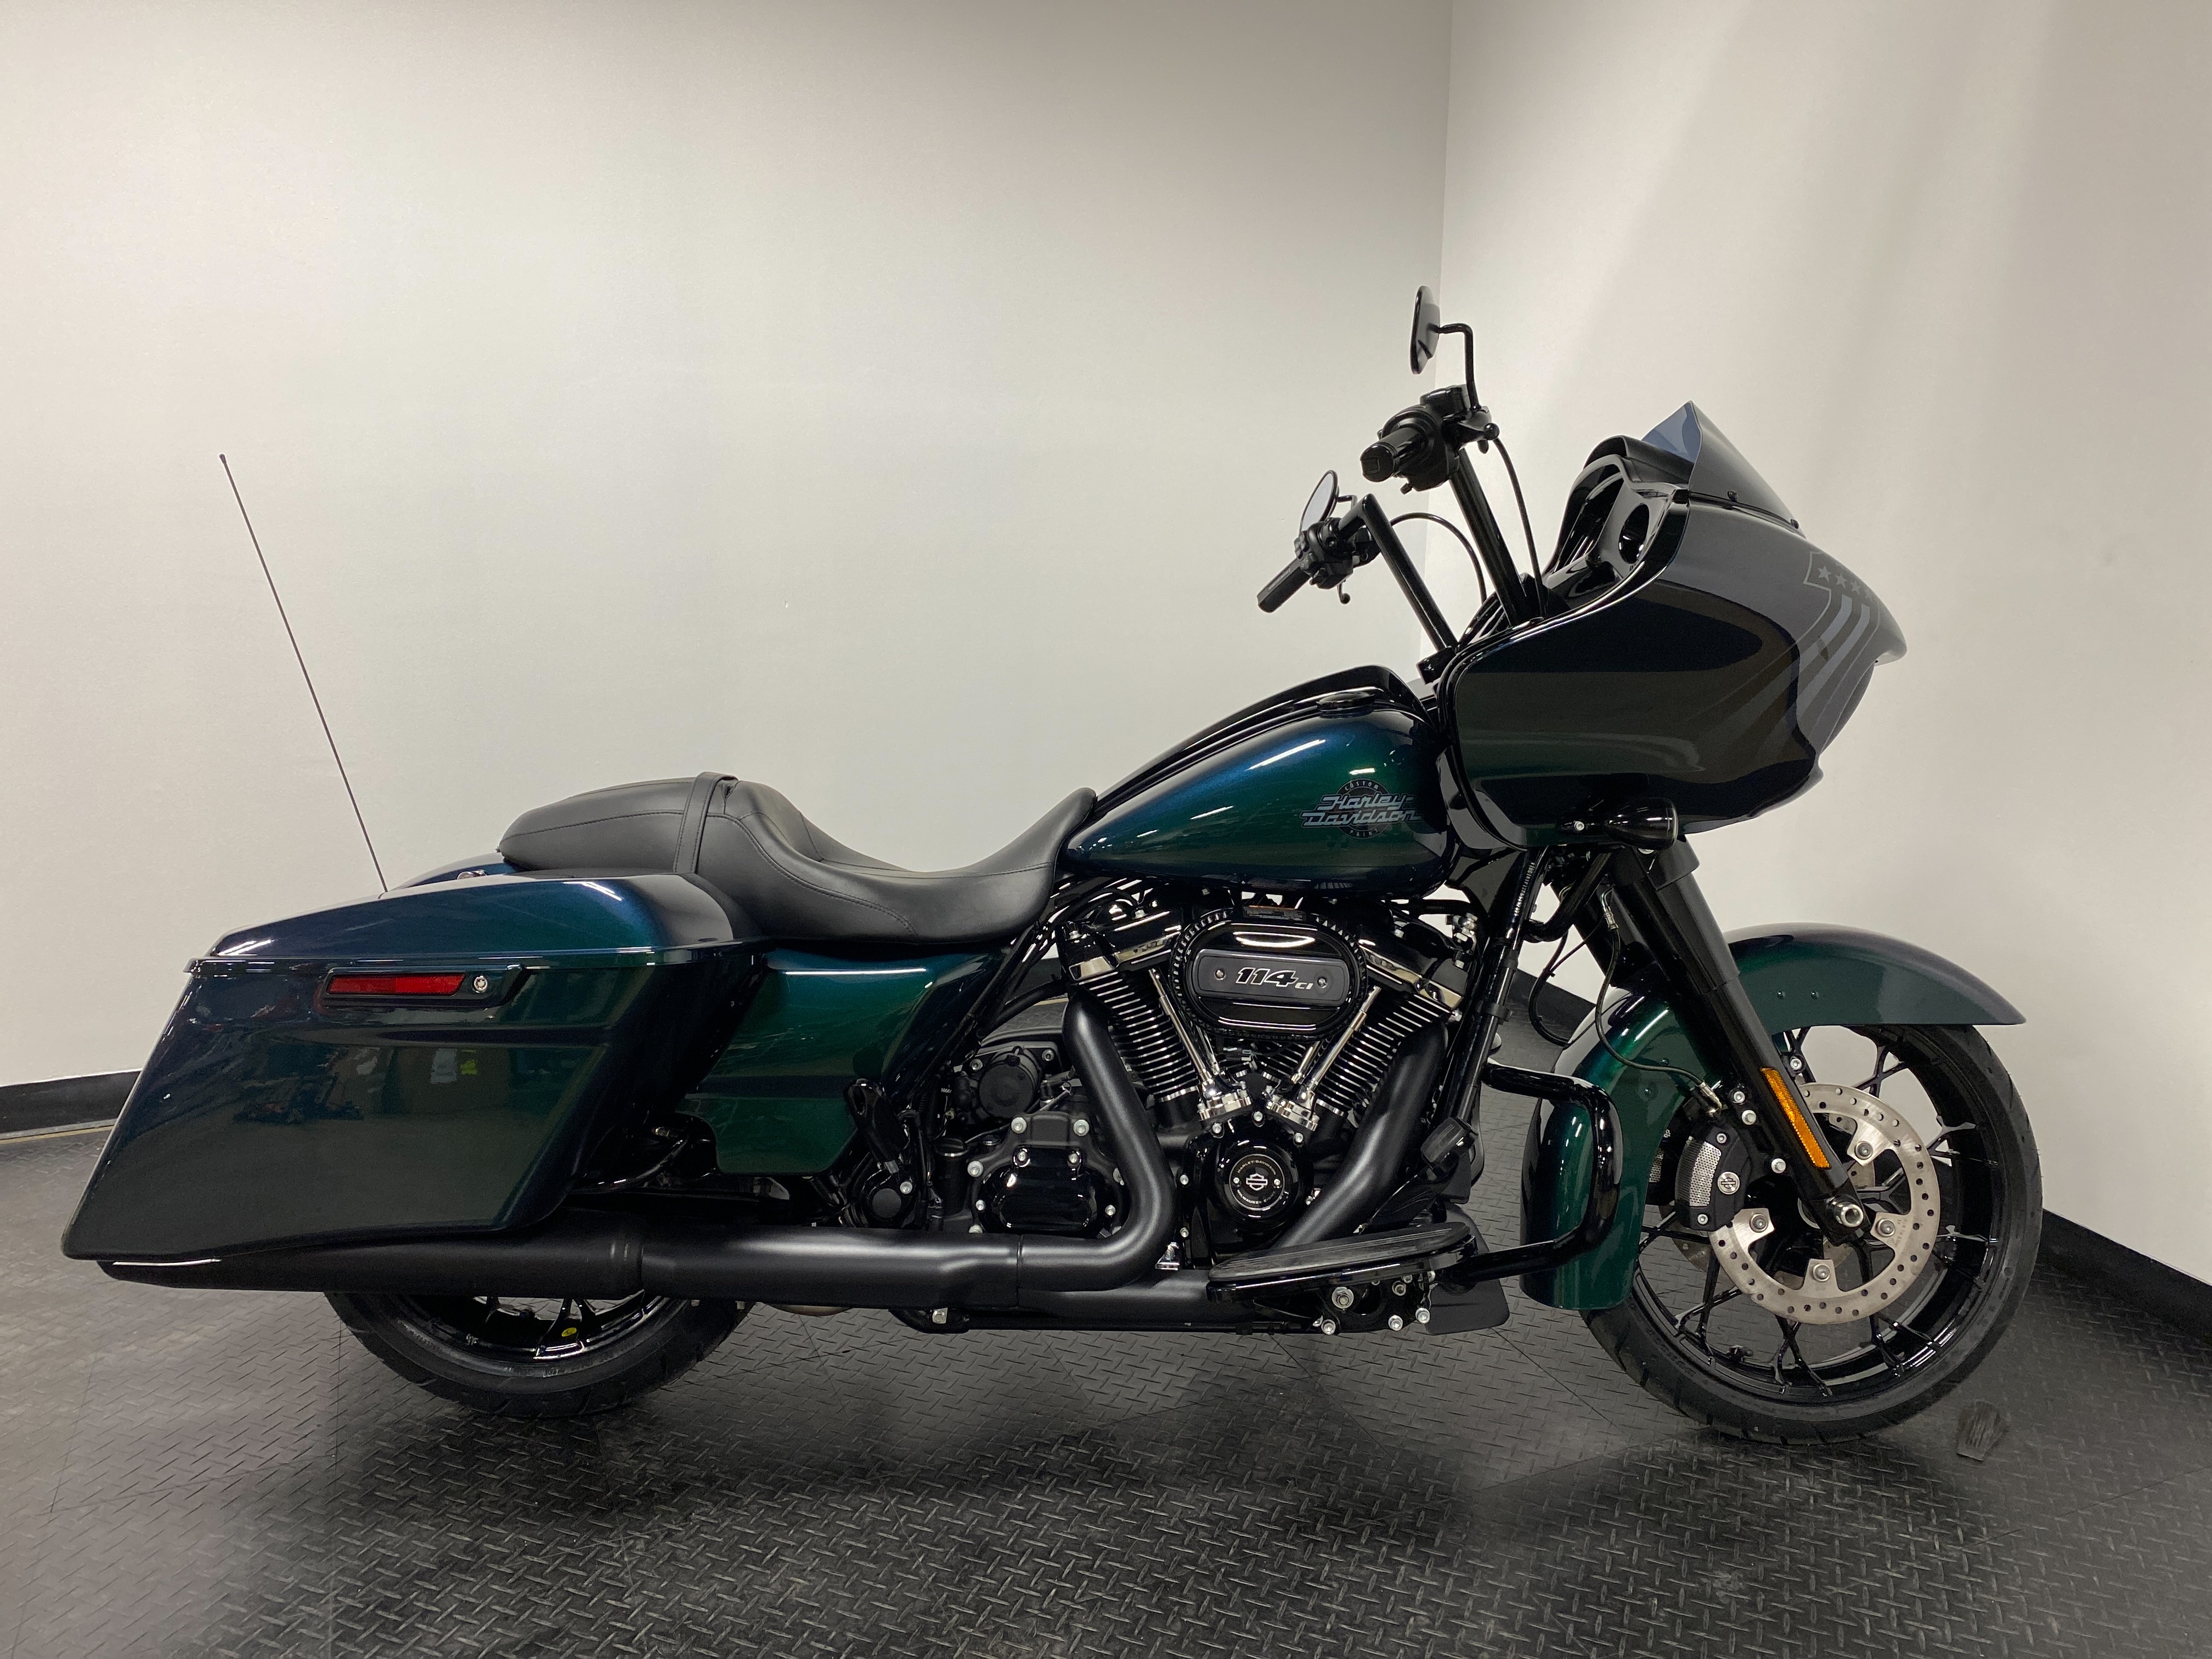 2021 Harley-Davidson Grand American Touring Road Glide Special at Cannonball Harley-Davidson